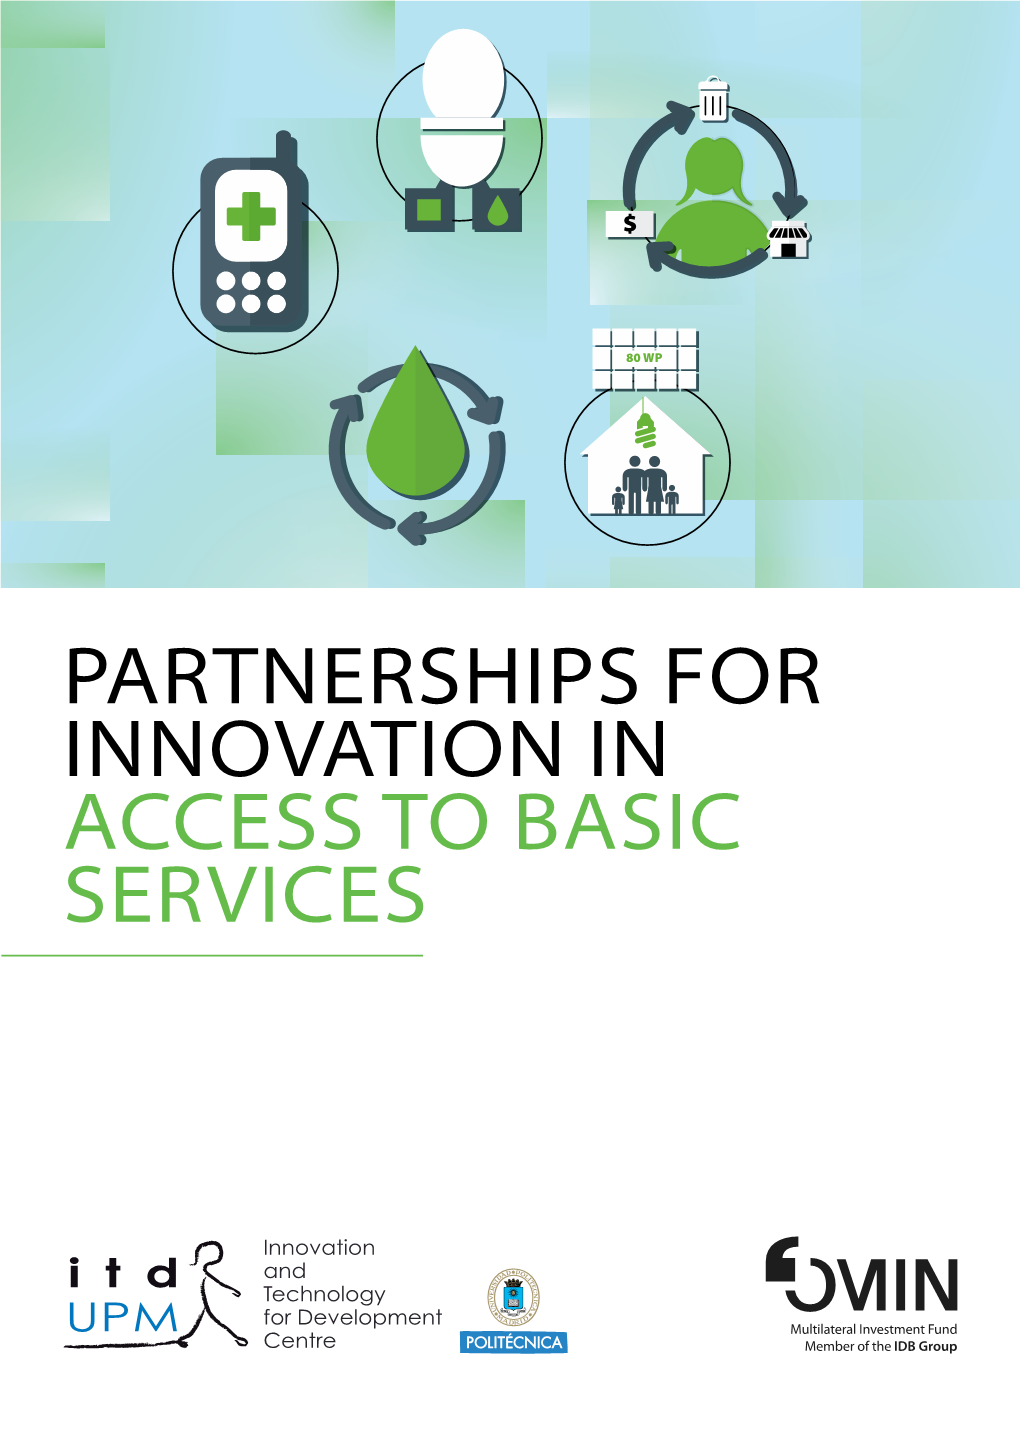 Partnerships for Innovation in Access to Basic Services